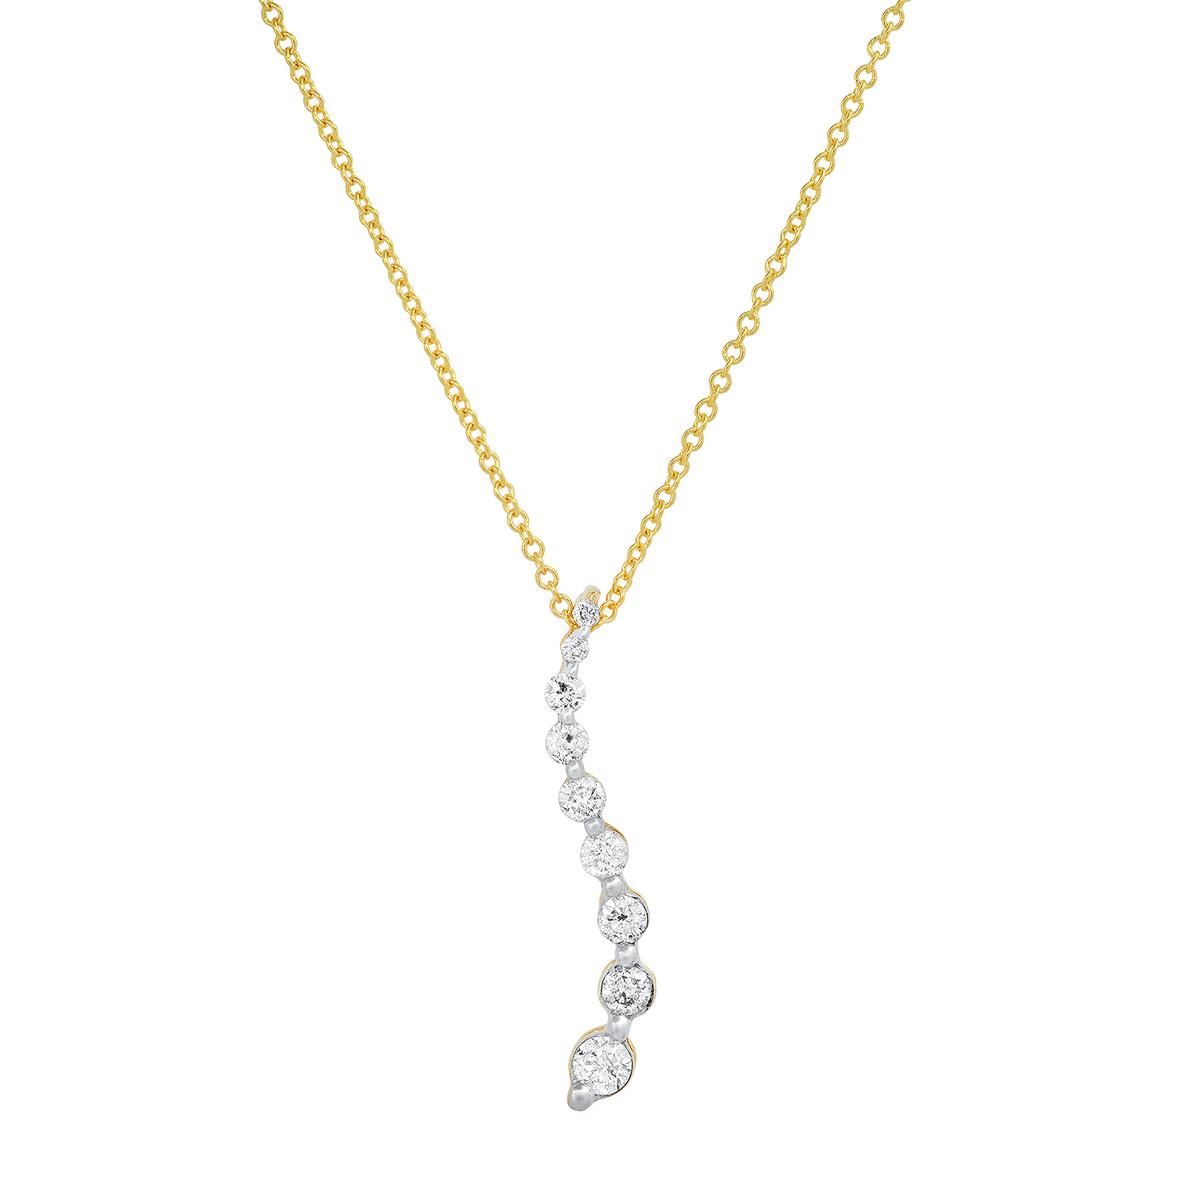 10K Yellow Gold Setting with 14K Yellow Gold Chain and 0.36ct Diamond Pendant